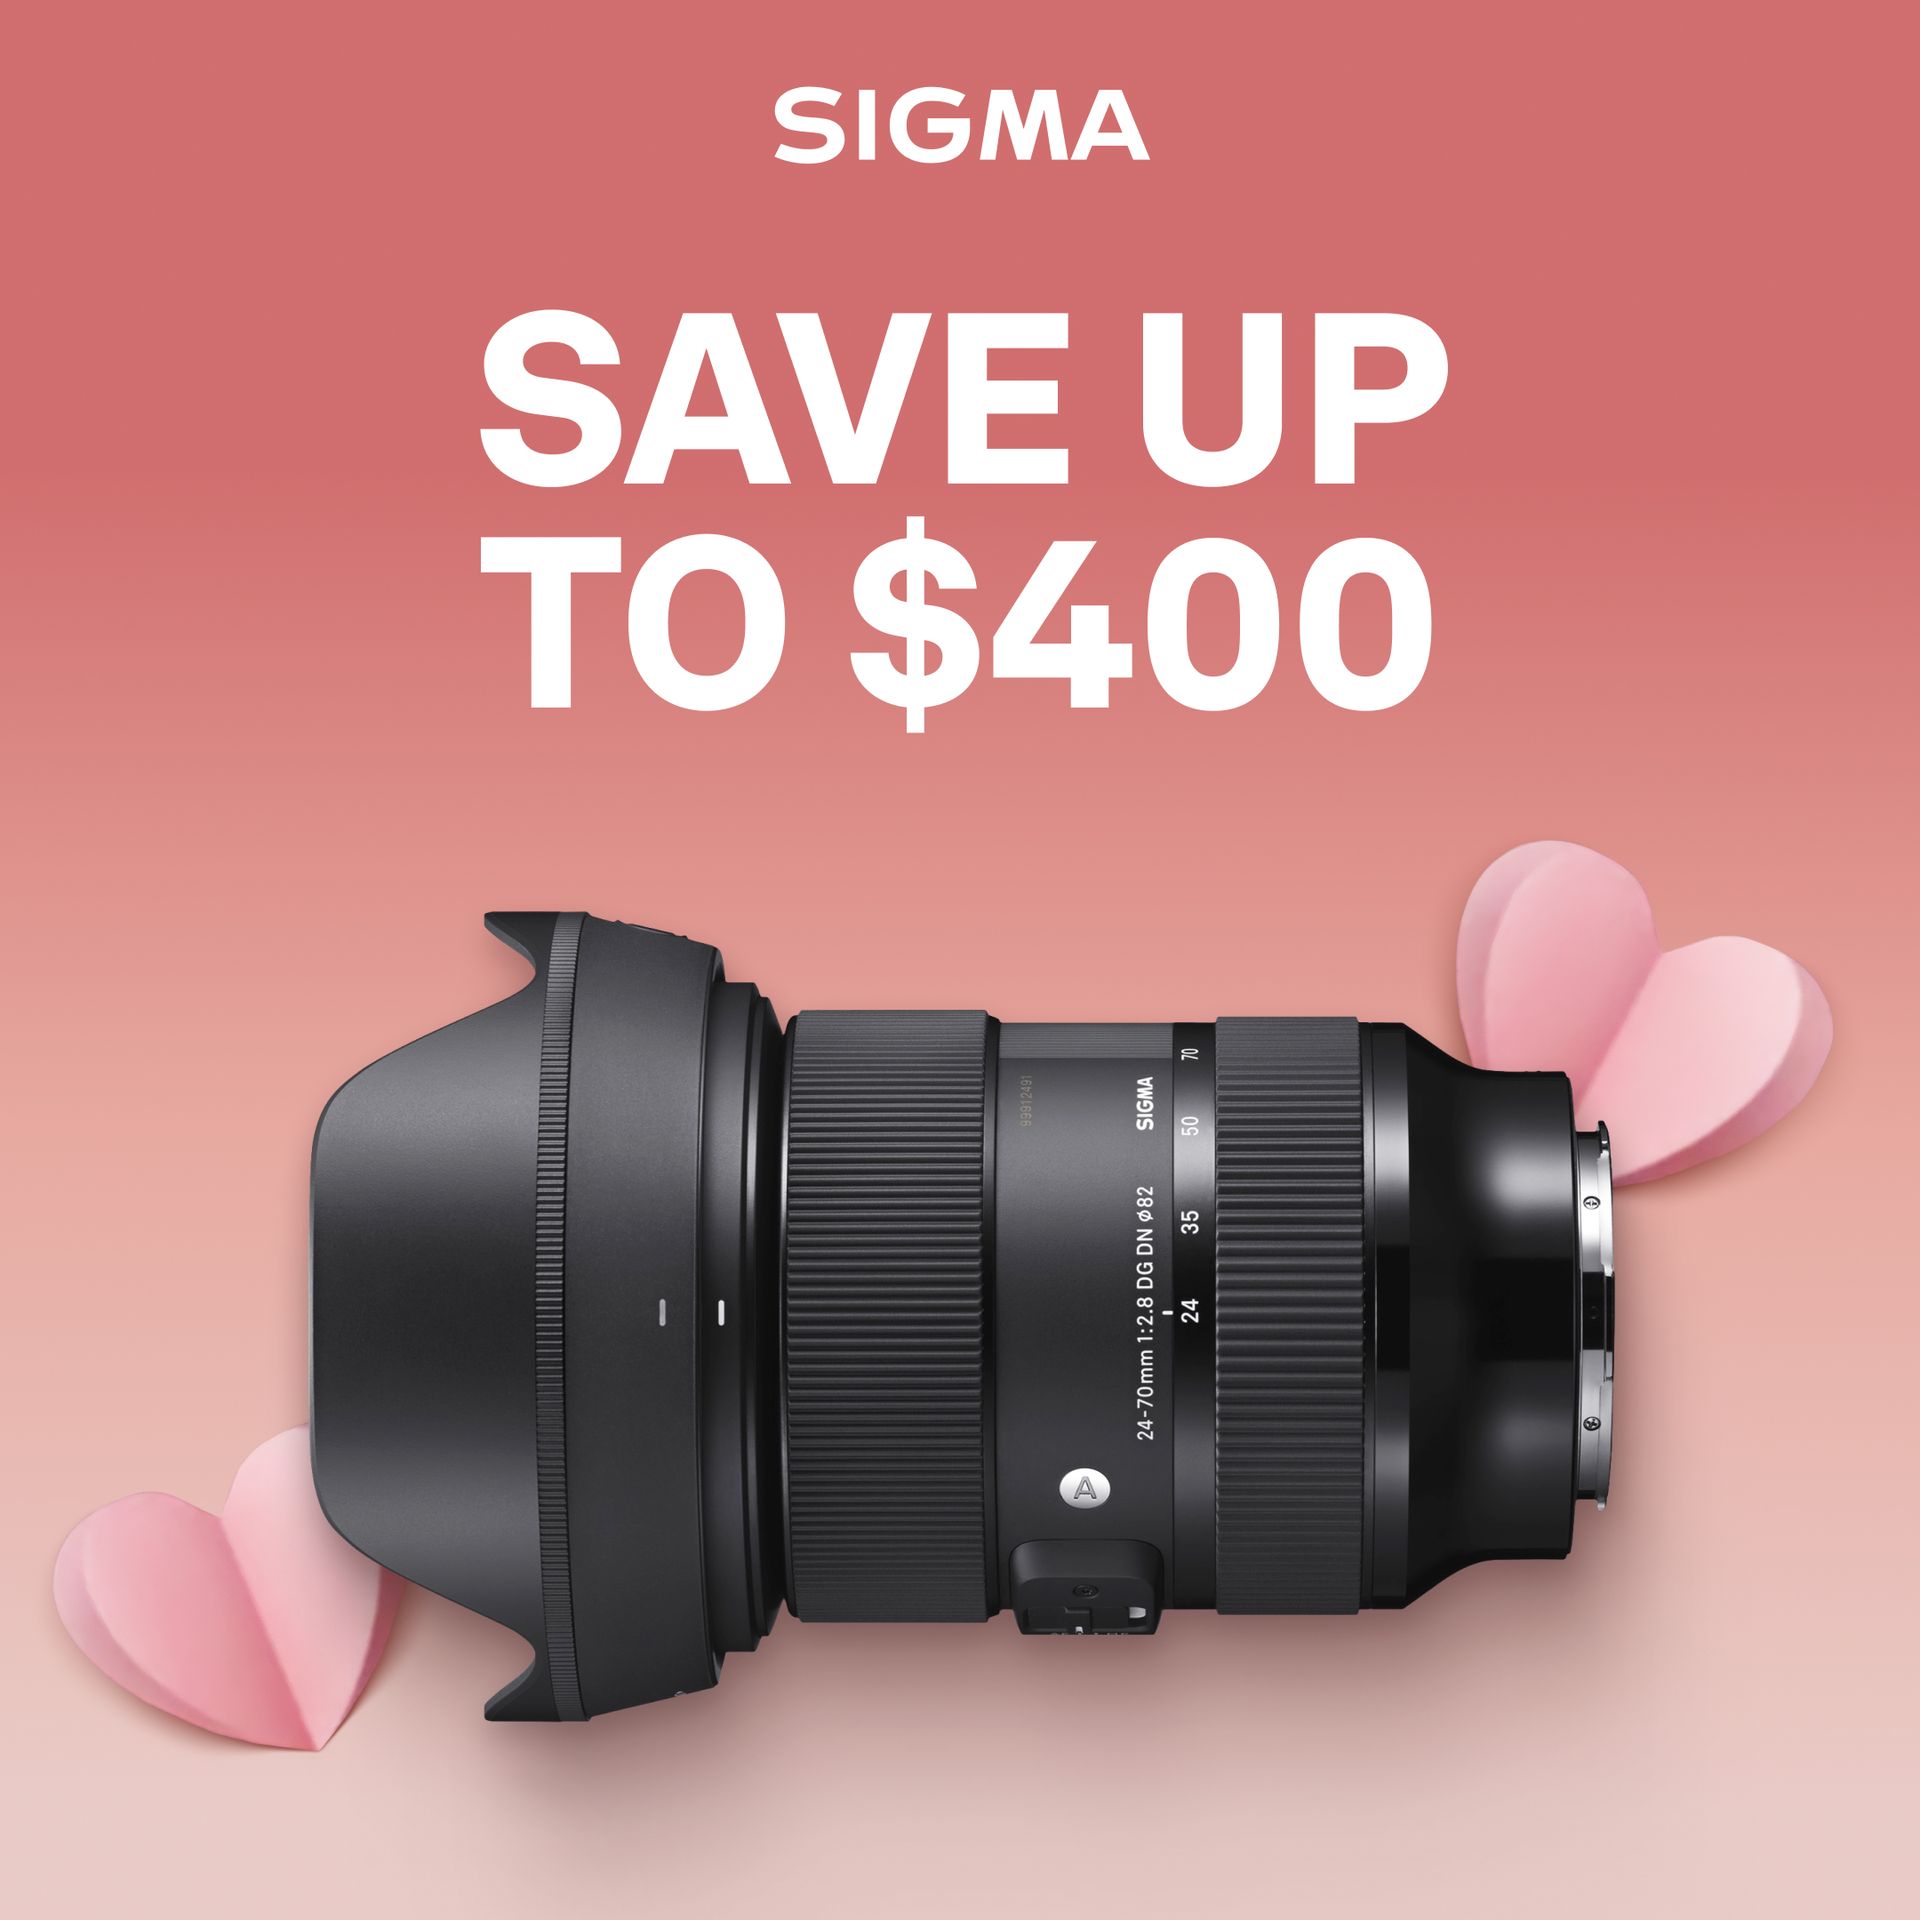 Save on SIGMA Lenses at Milford Photo